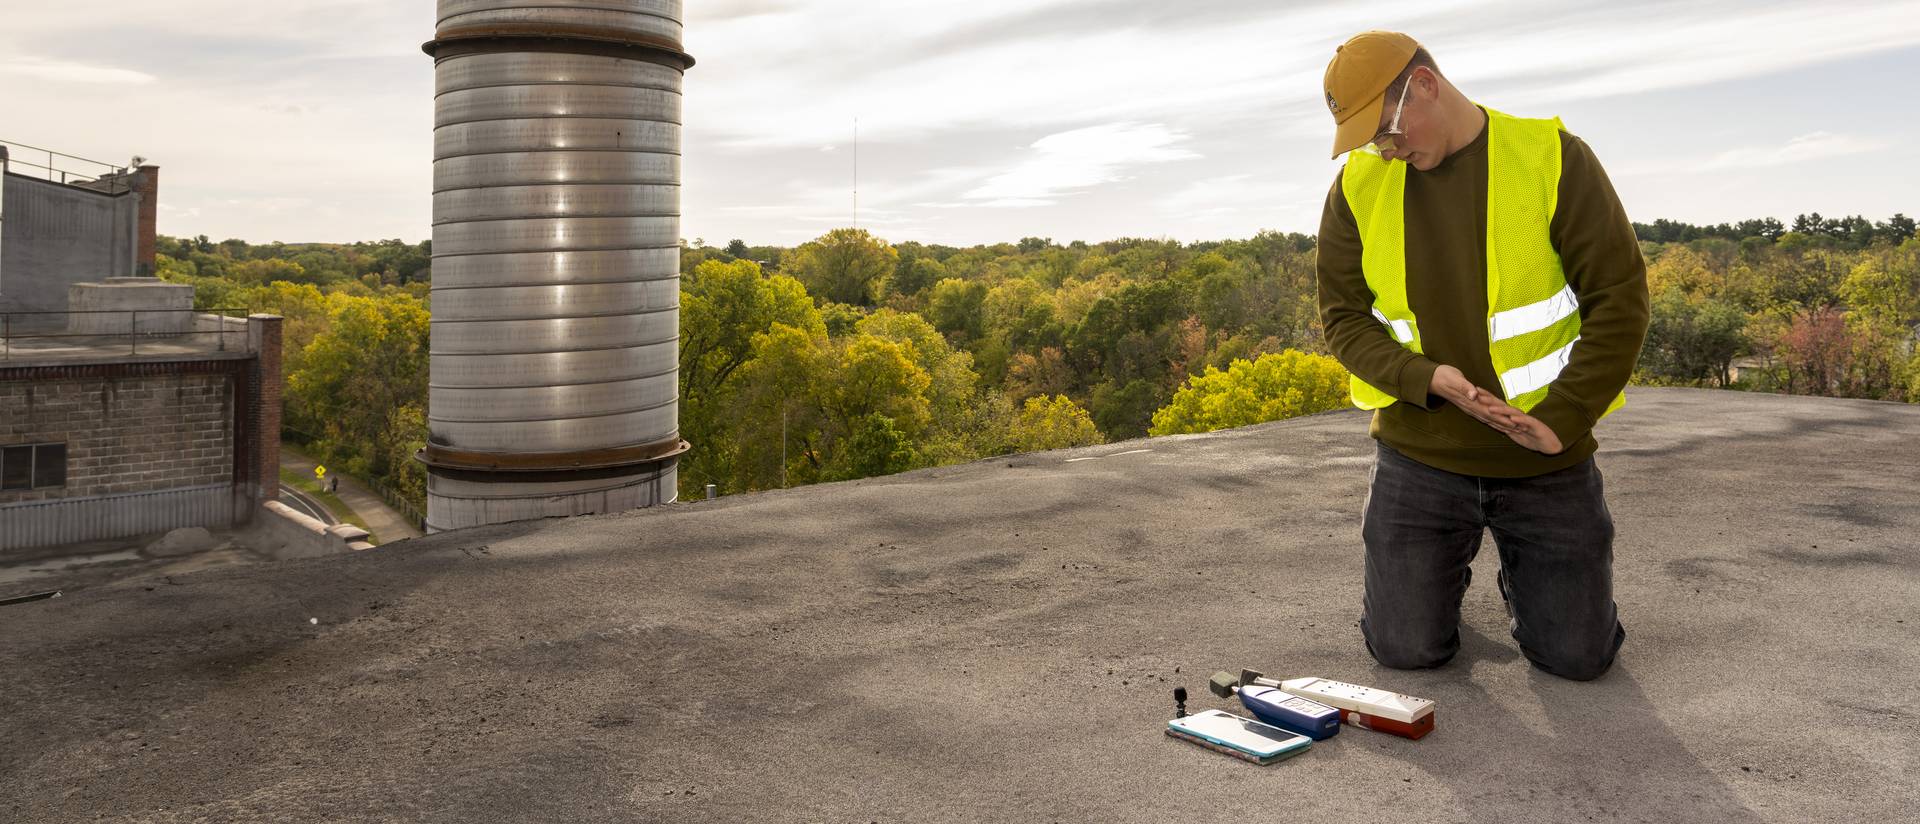 A male student wearing safety gear kneeling on a metal rooftop checking some measurement instruments